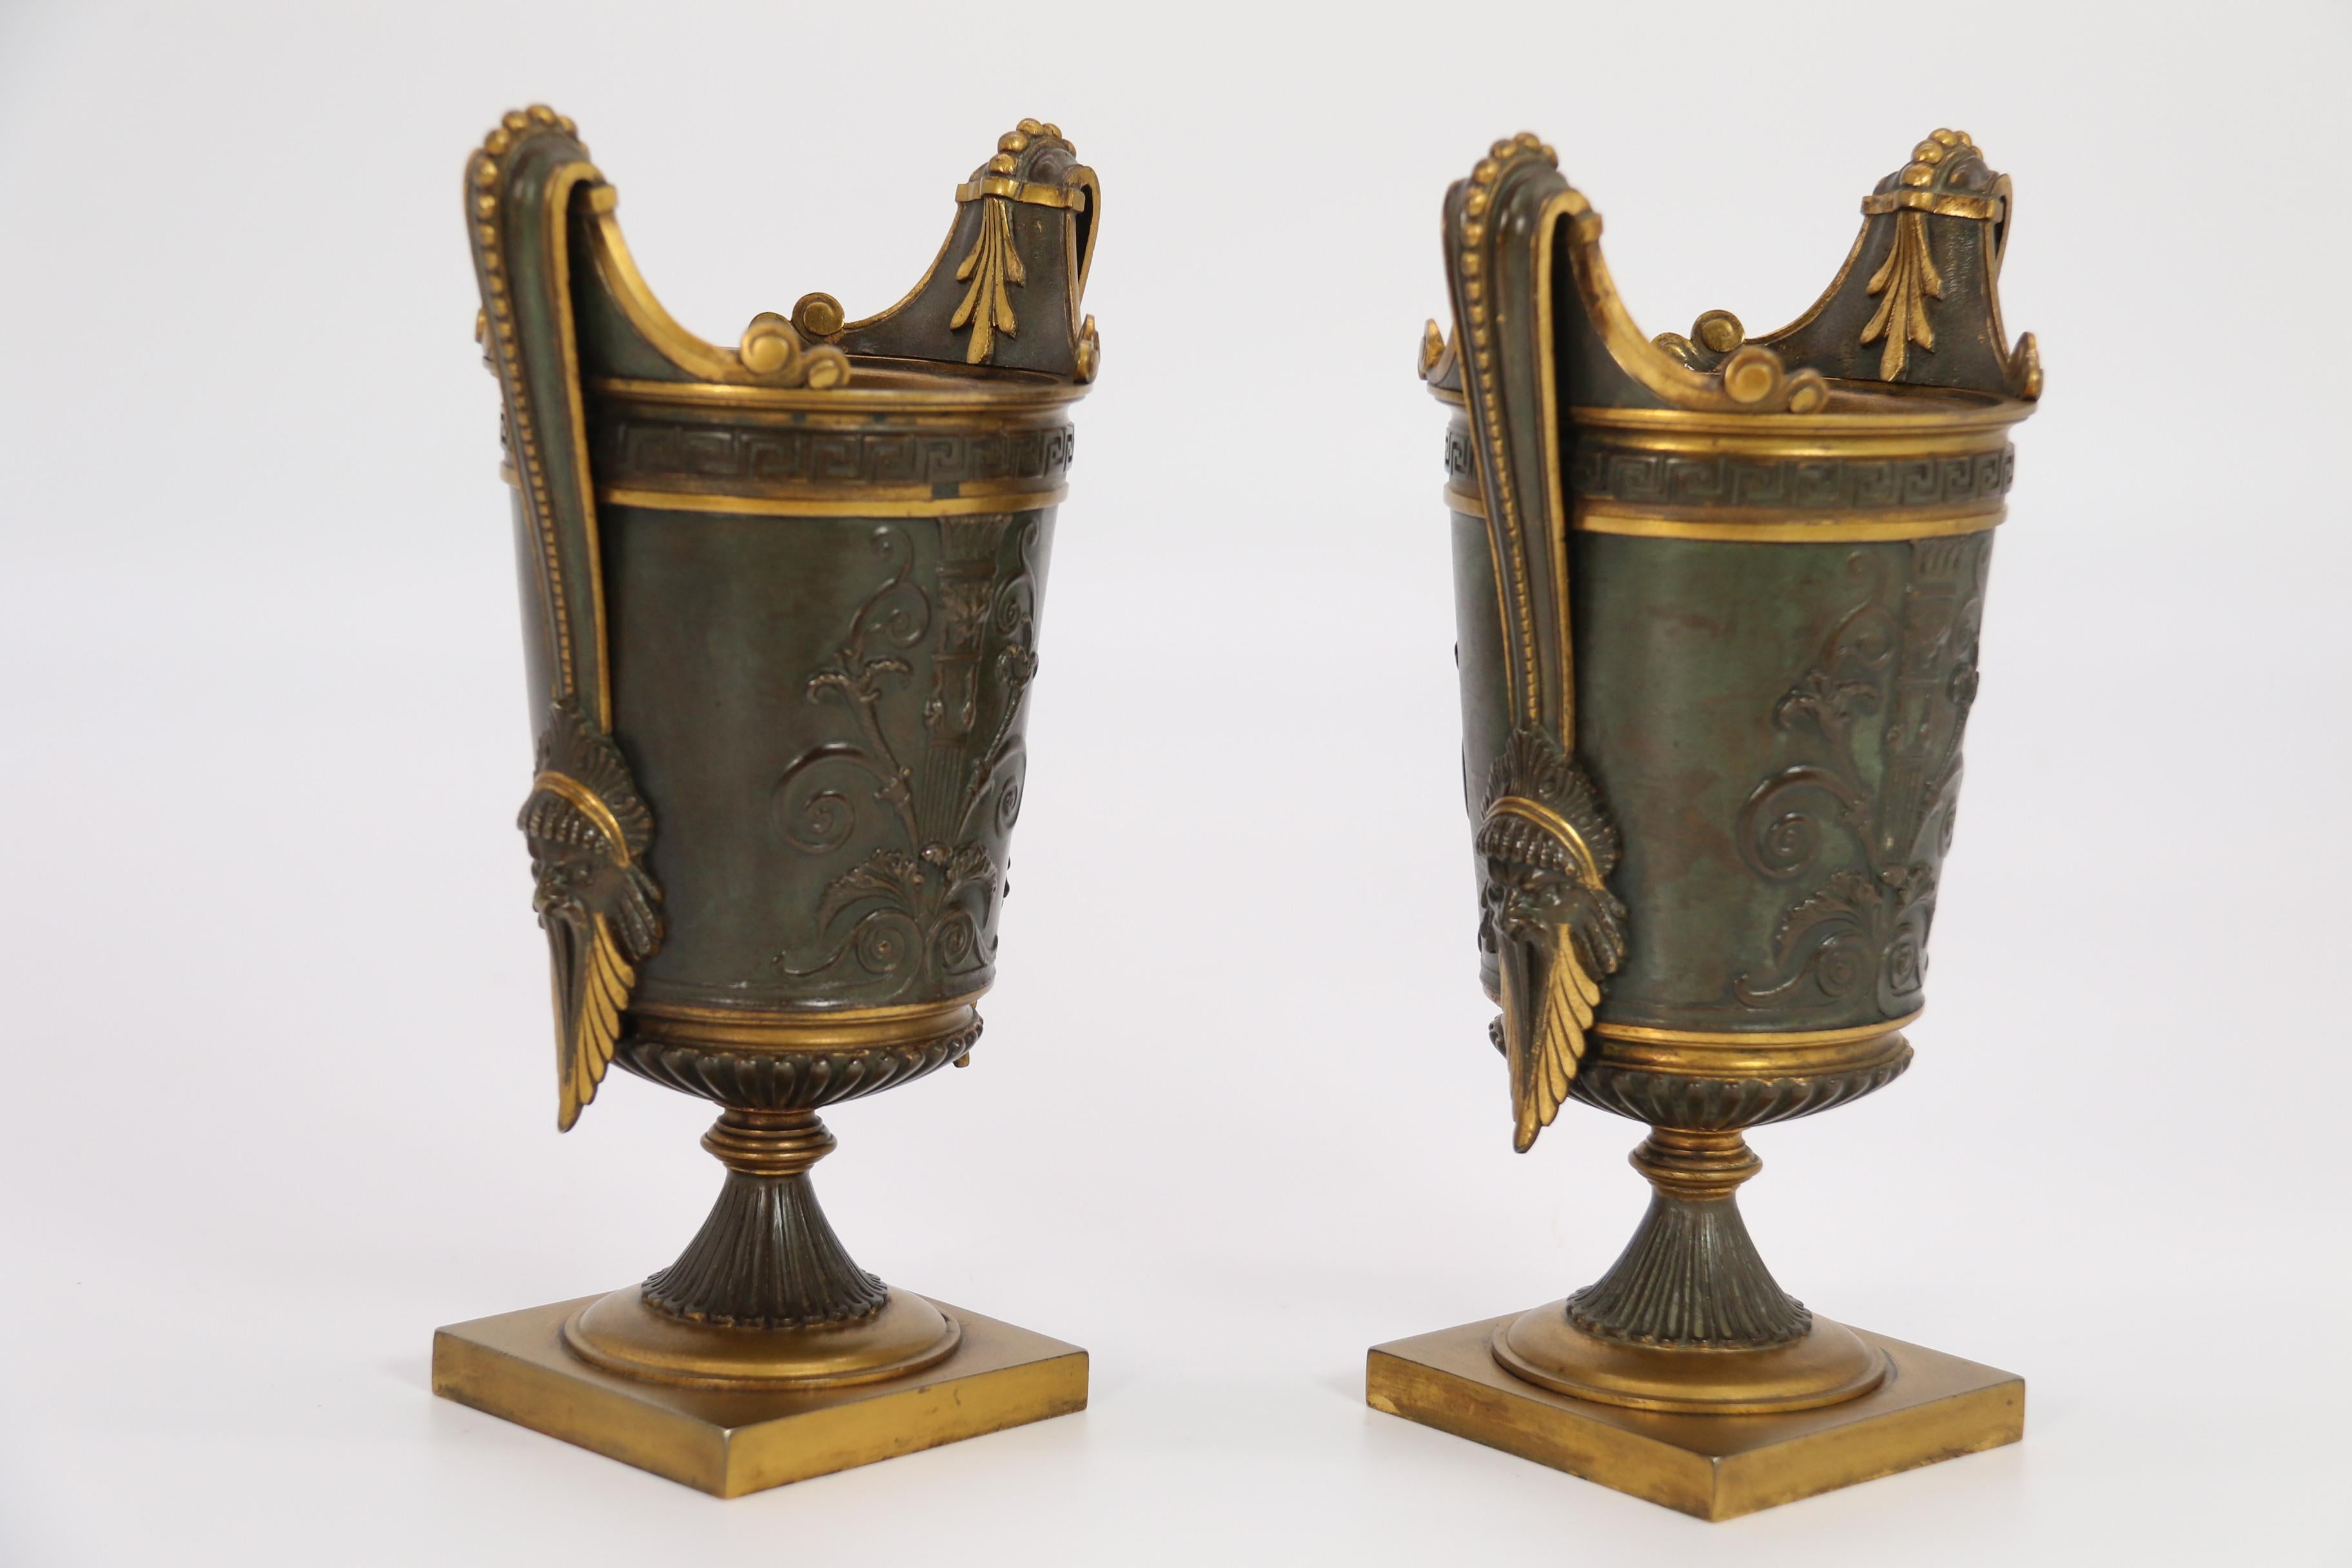 Cast Empire period bronze and ormolu Grecian style pair of classical urns, circa 1830 For Sale